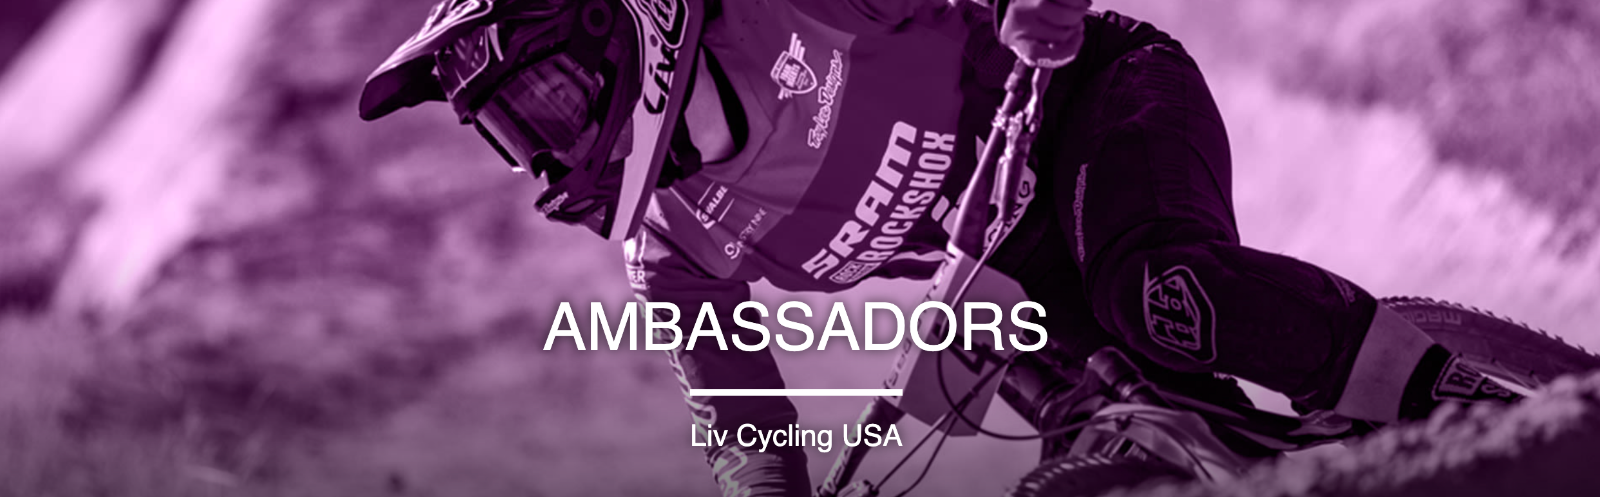 Ride with the LIV and Giant ambassadors Bentonville Bike Fest where everyone is welcome